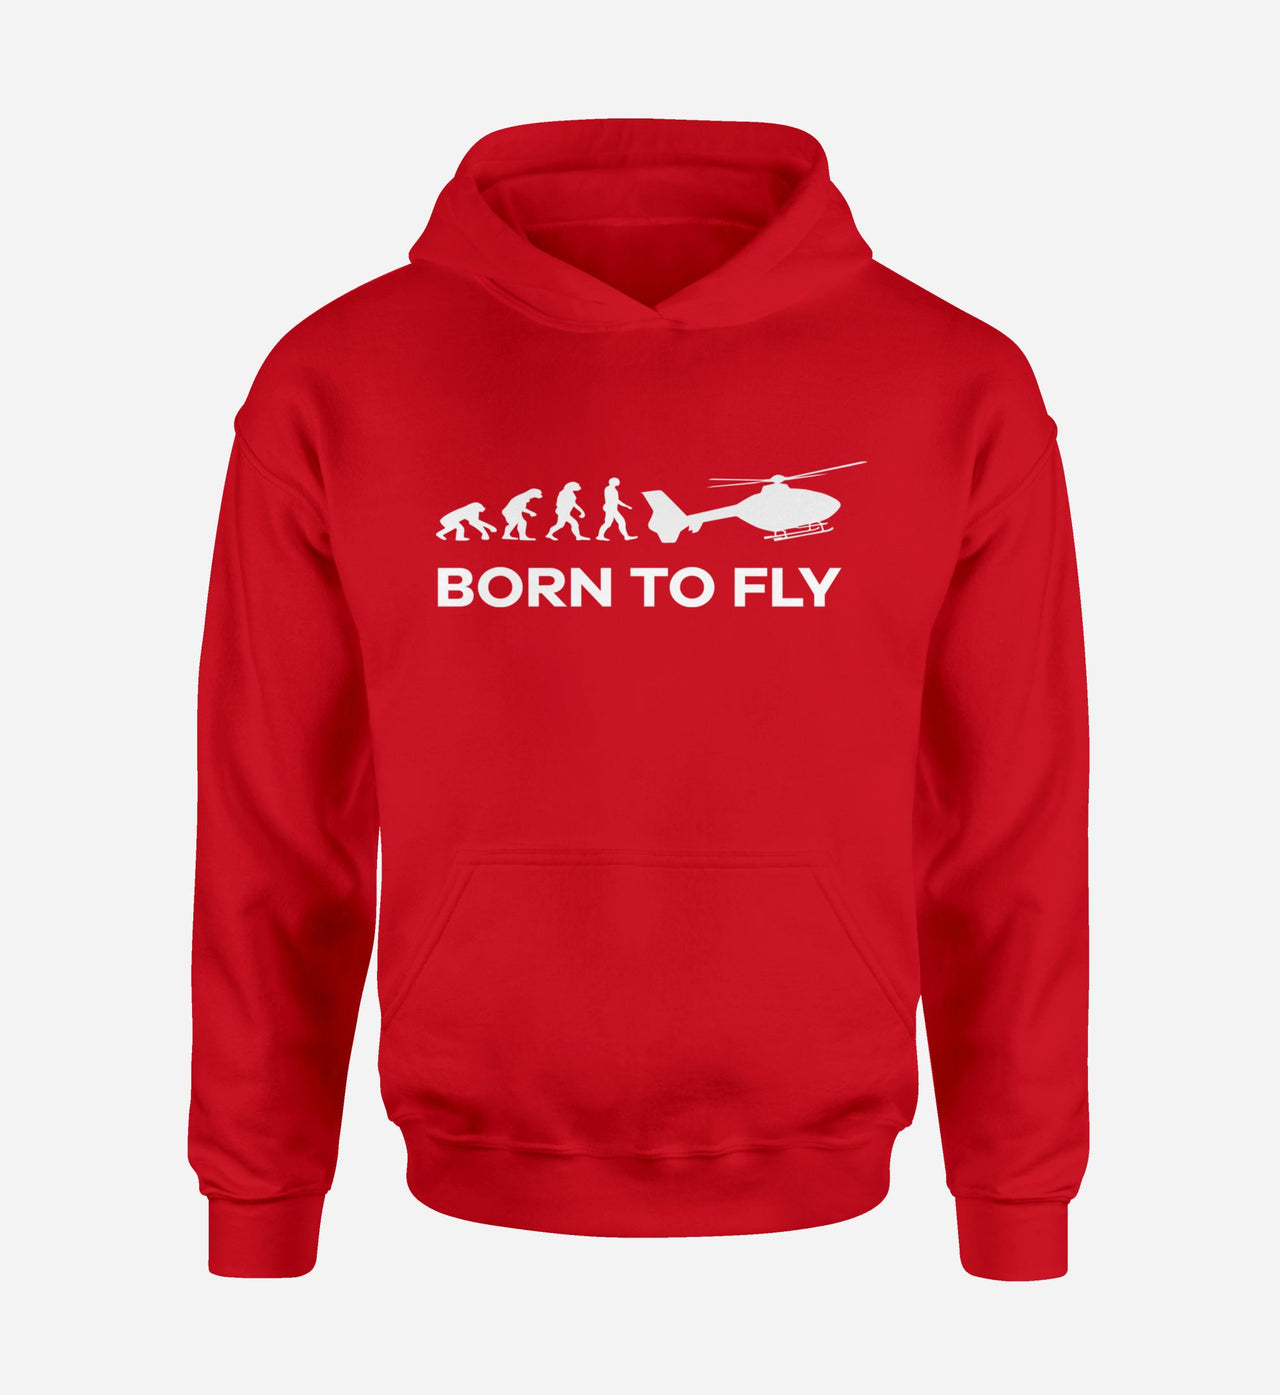 Born To Fly Helicopter Designed Hoodies